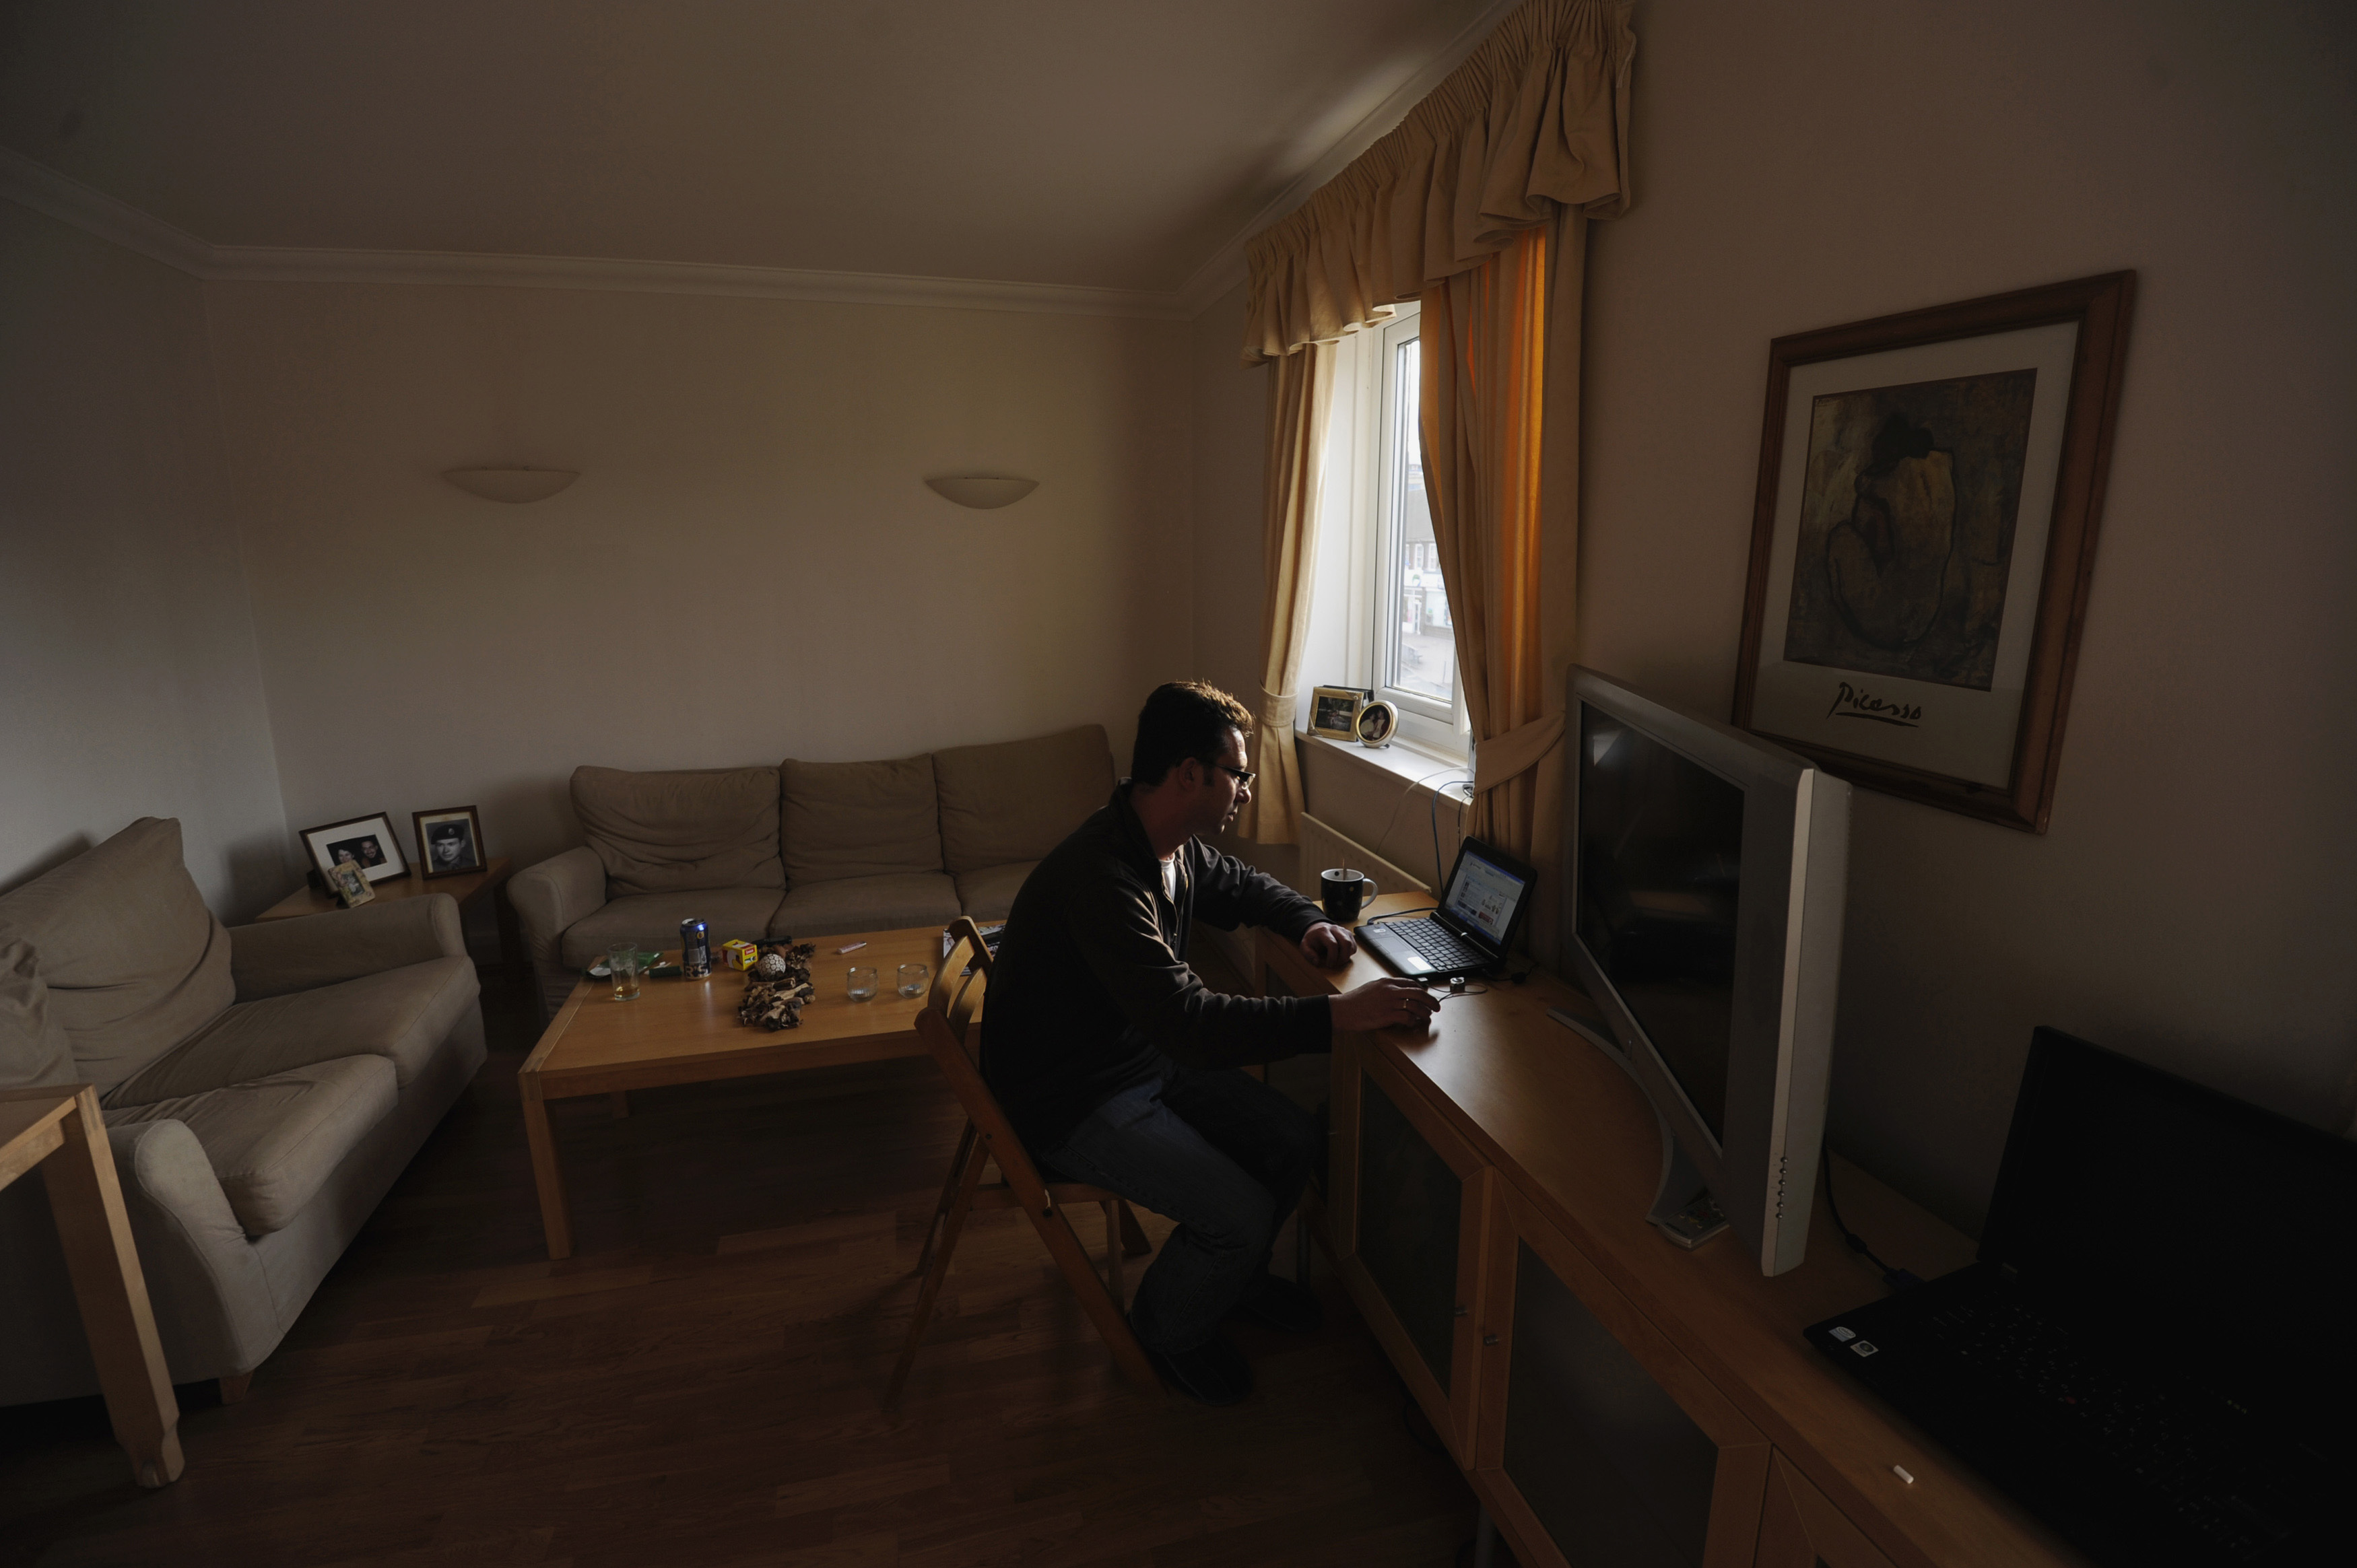 George Kapetanios looks at a laptop computer at his flat in Potters Bar, on the outskirts of London